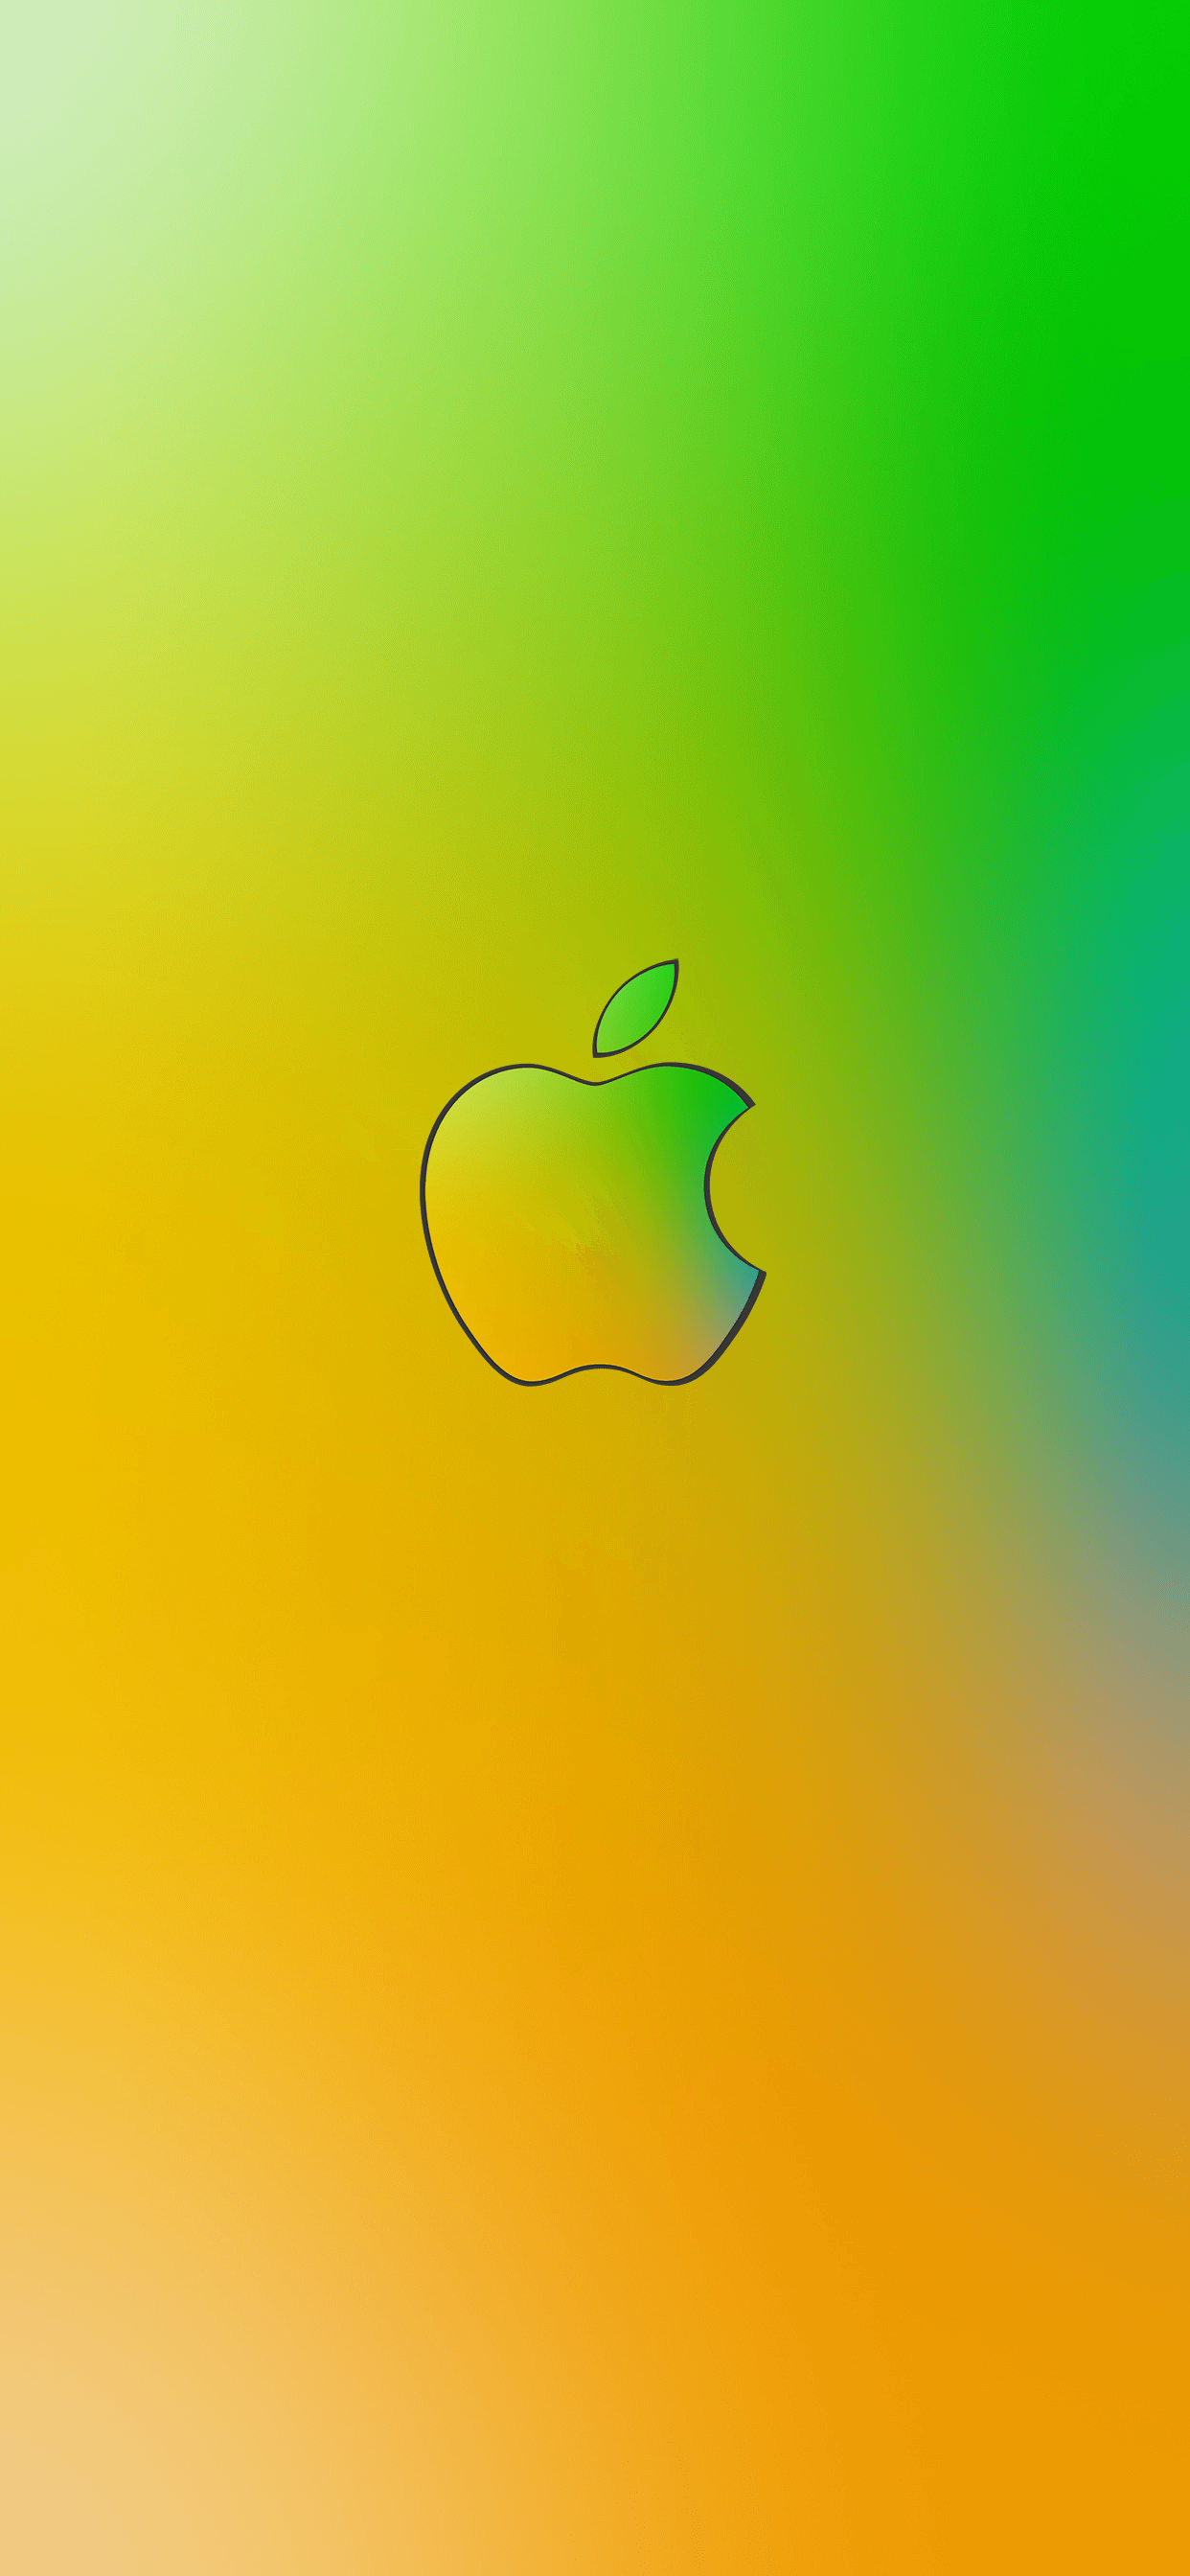 Apple Card wallpaper for iPhone, iPad, and desktop